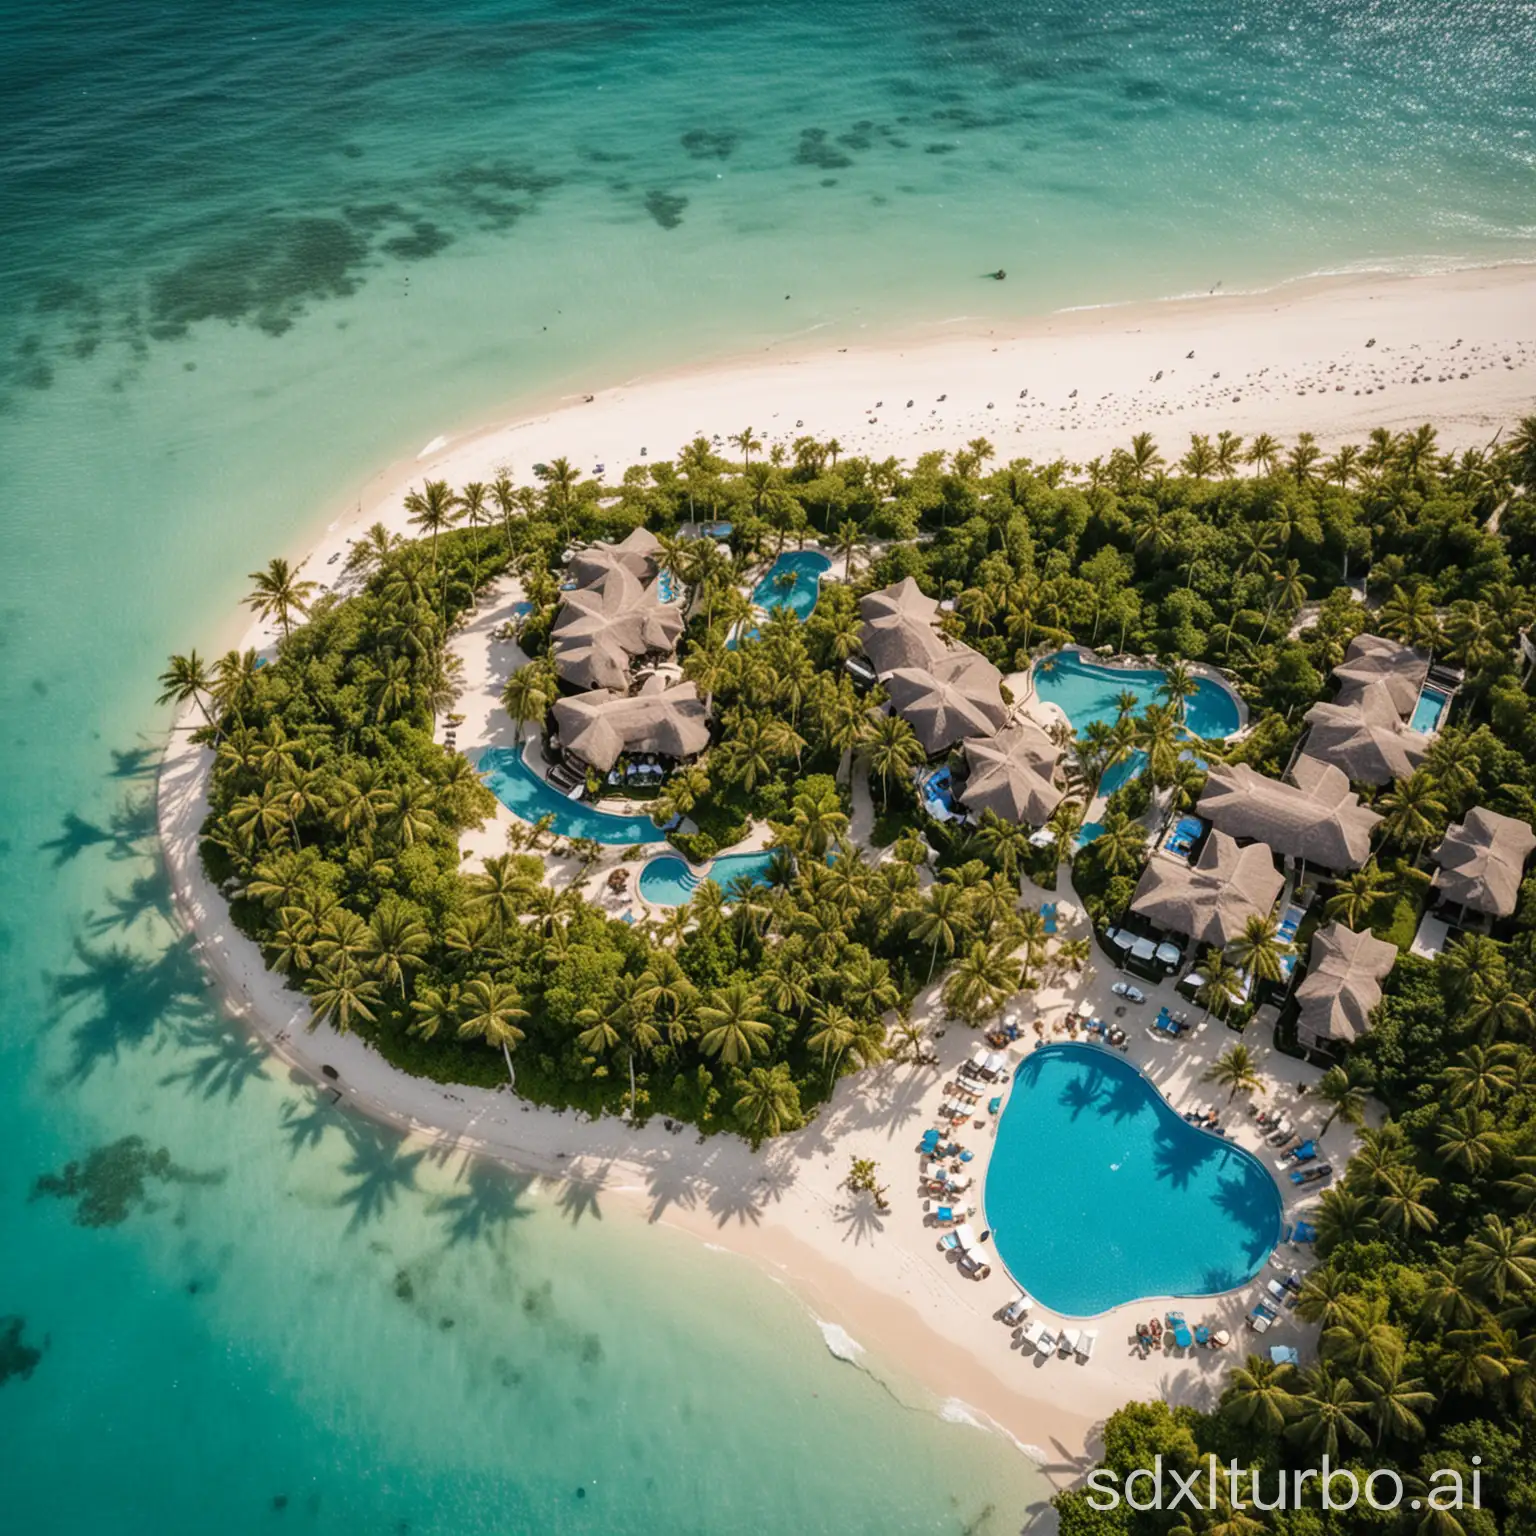 Luxurious-Resort-with-White-Sand-Beach-and-Crystal-Blue-Water